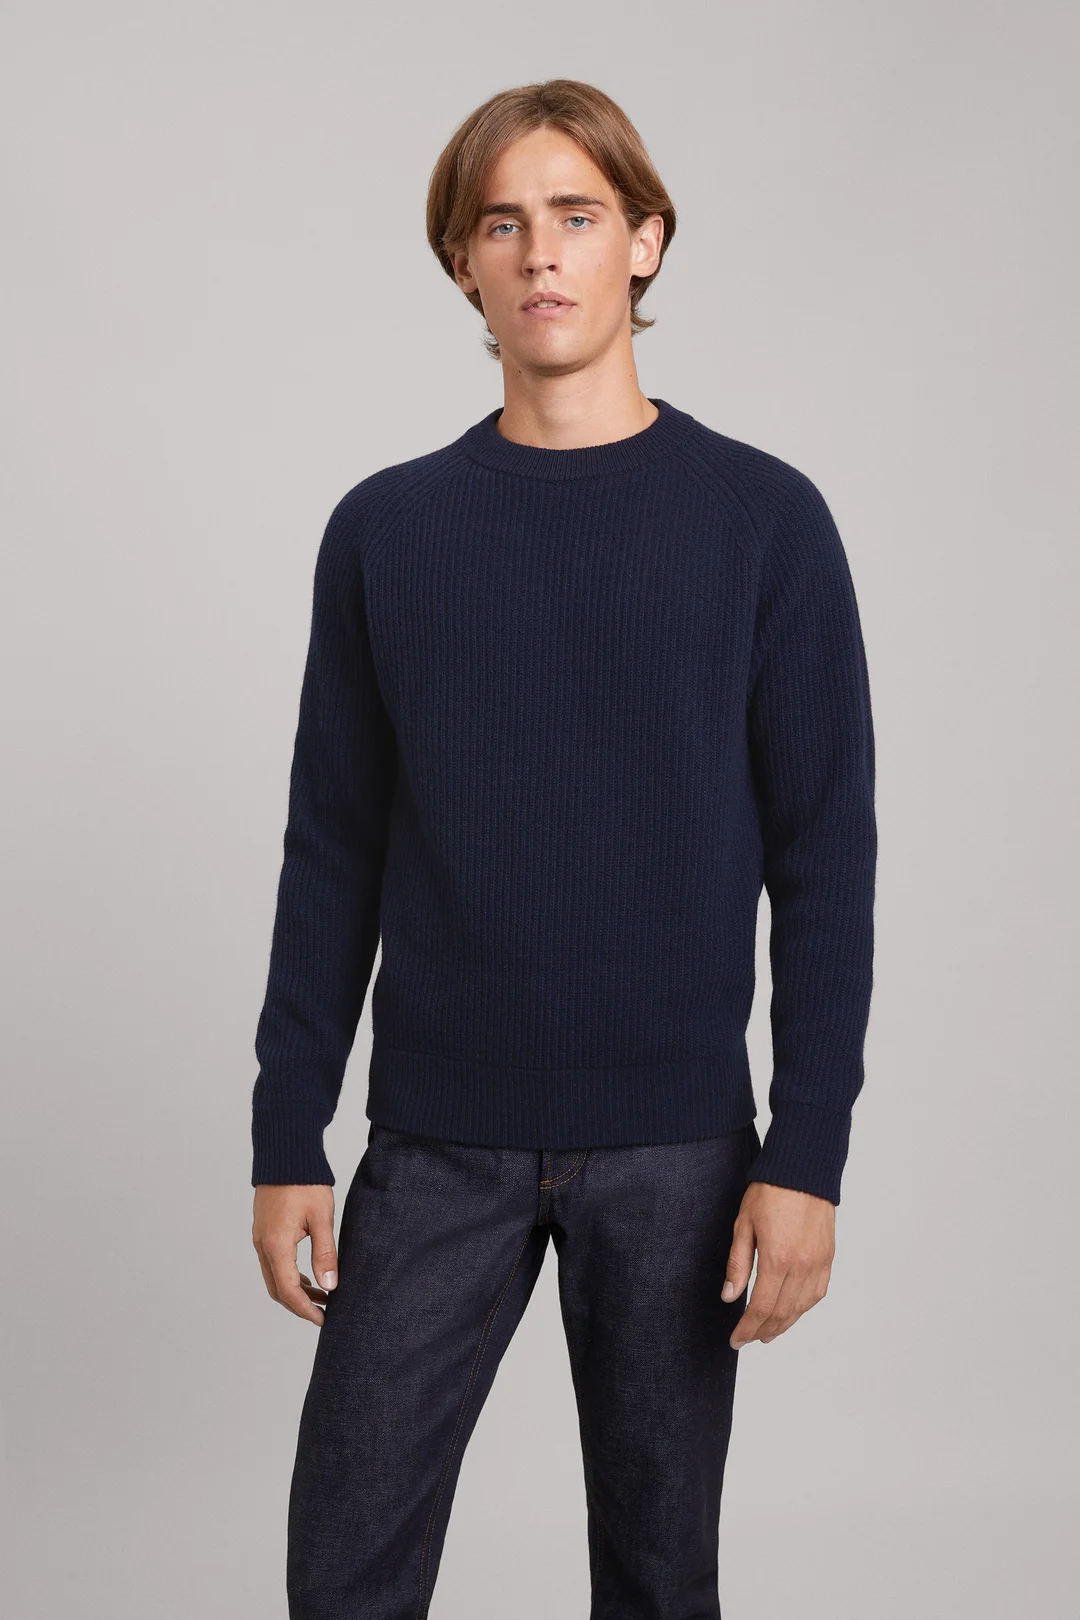 ASKET - The Heavy Wool Sweater Brown - Recycled Wool - Mens